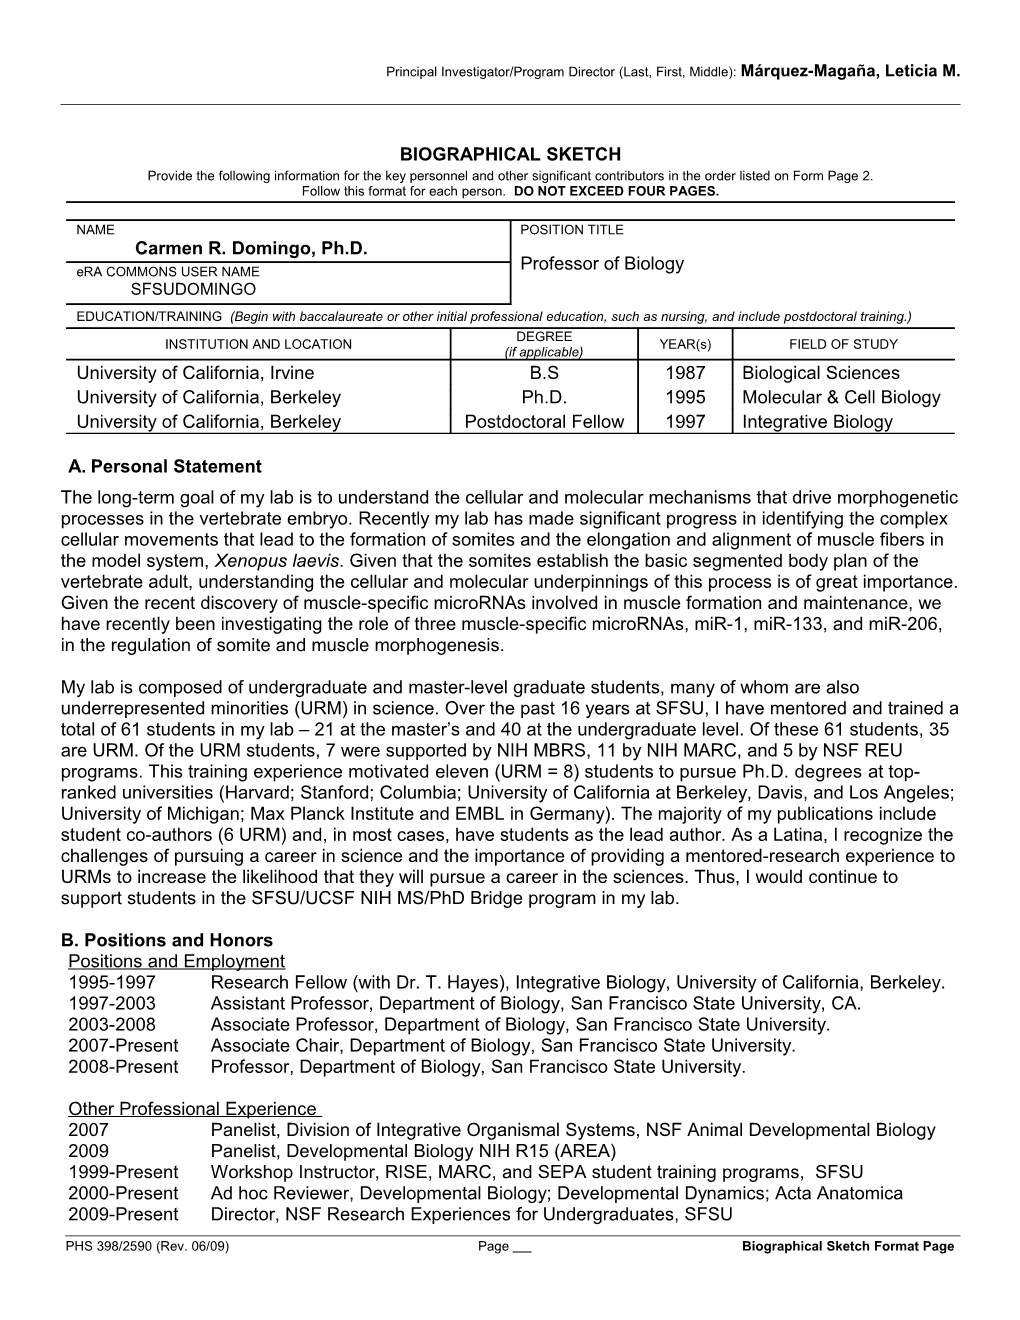 PHS 398 (Rev. 9/04), Biographical Sketch Format Page s3